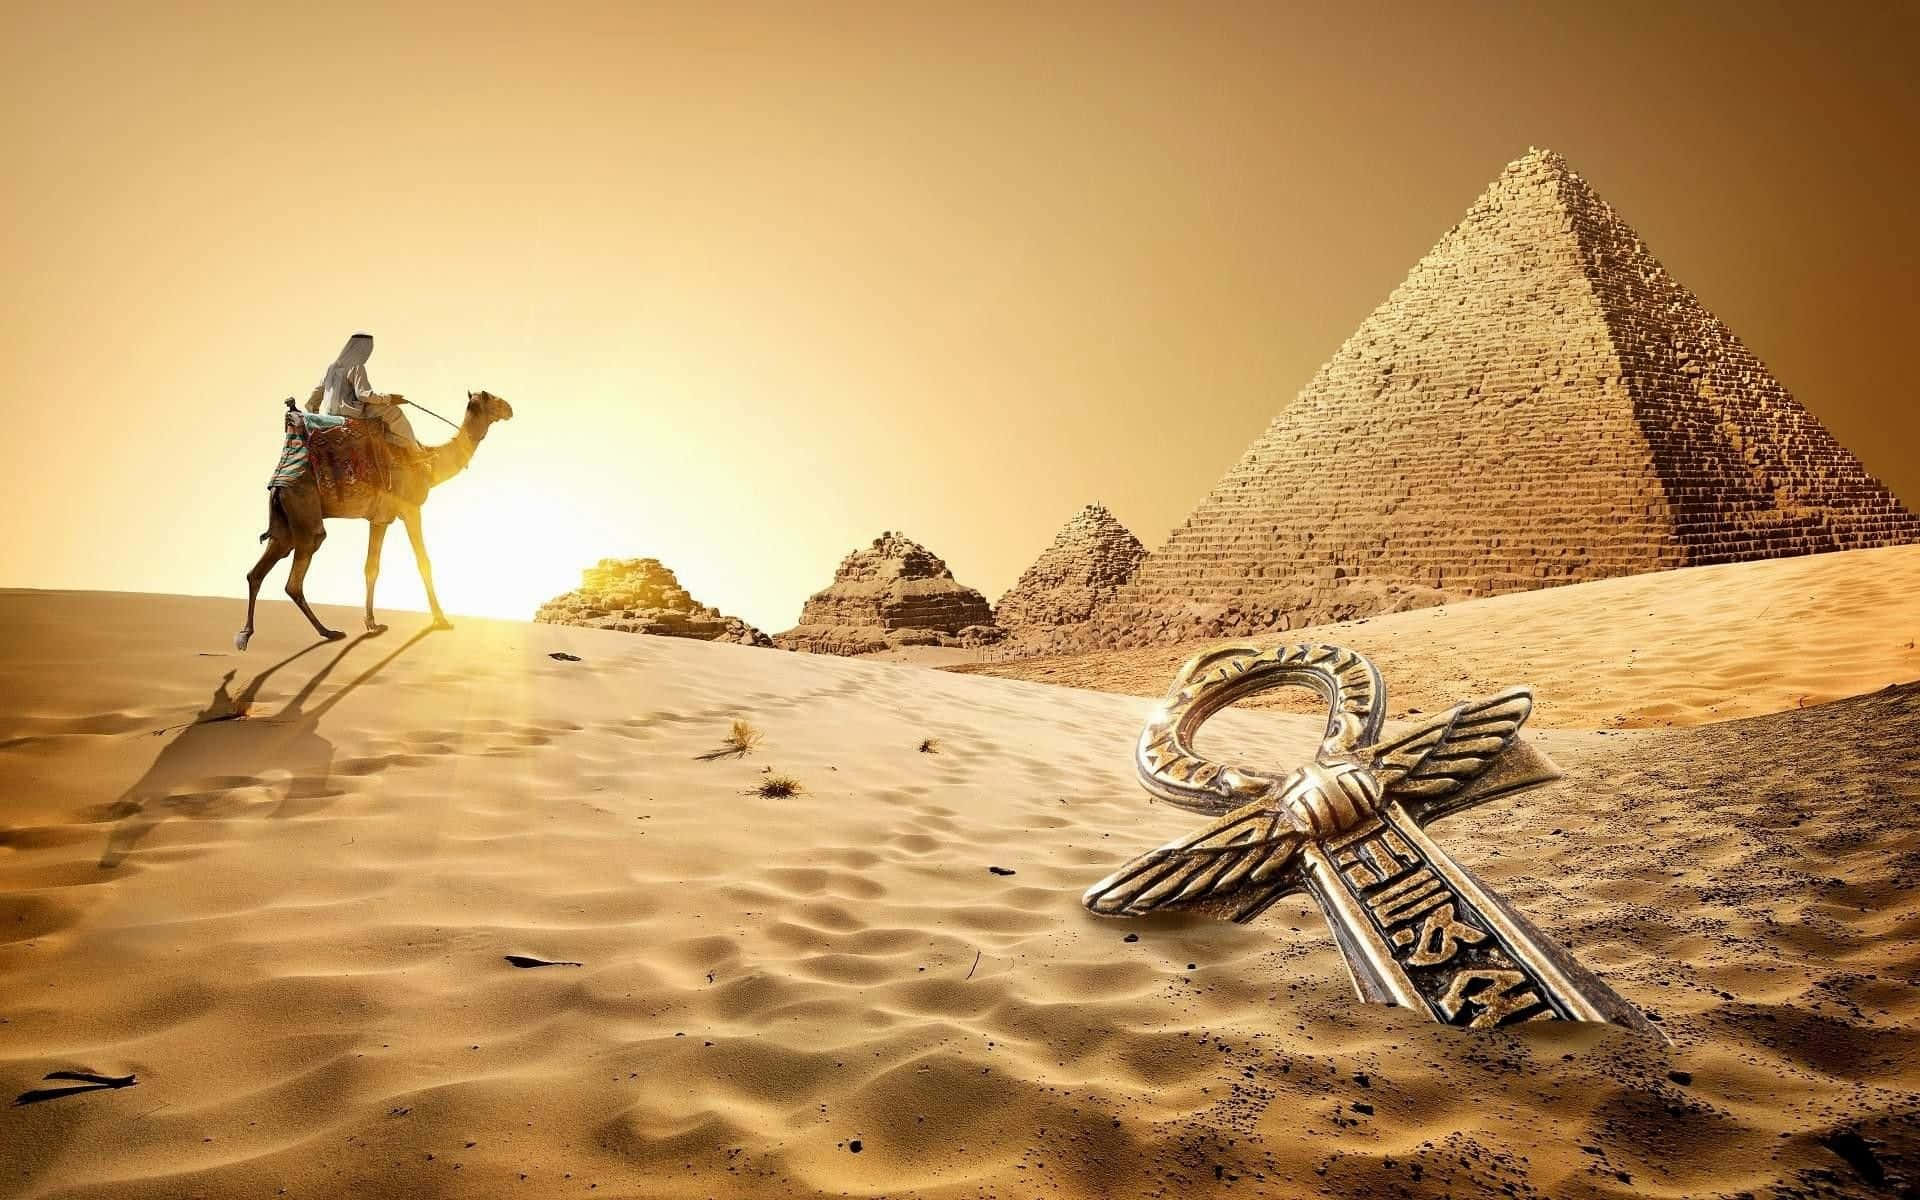 A Camel Is Standing In The Desert With A Pyramid In The Background Wallpaper